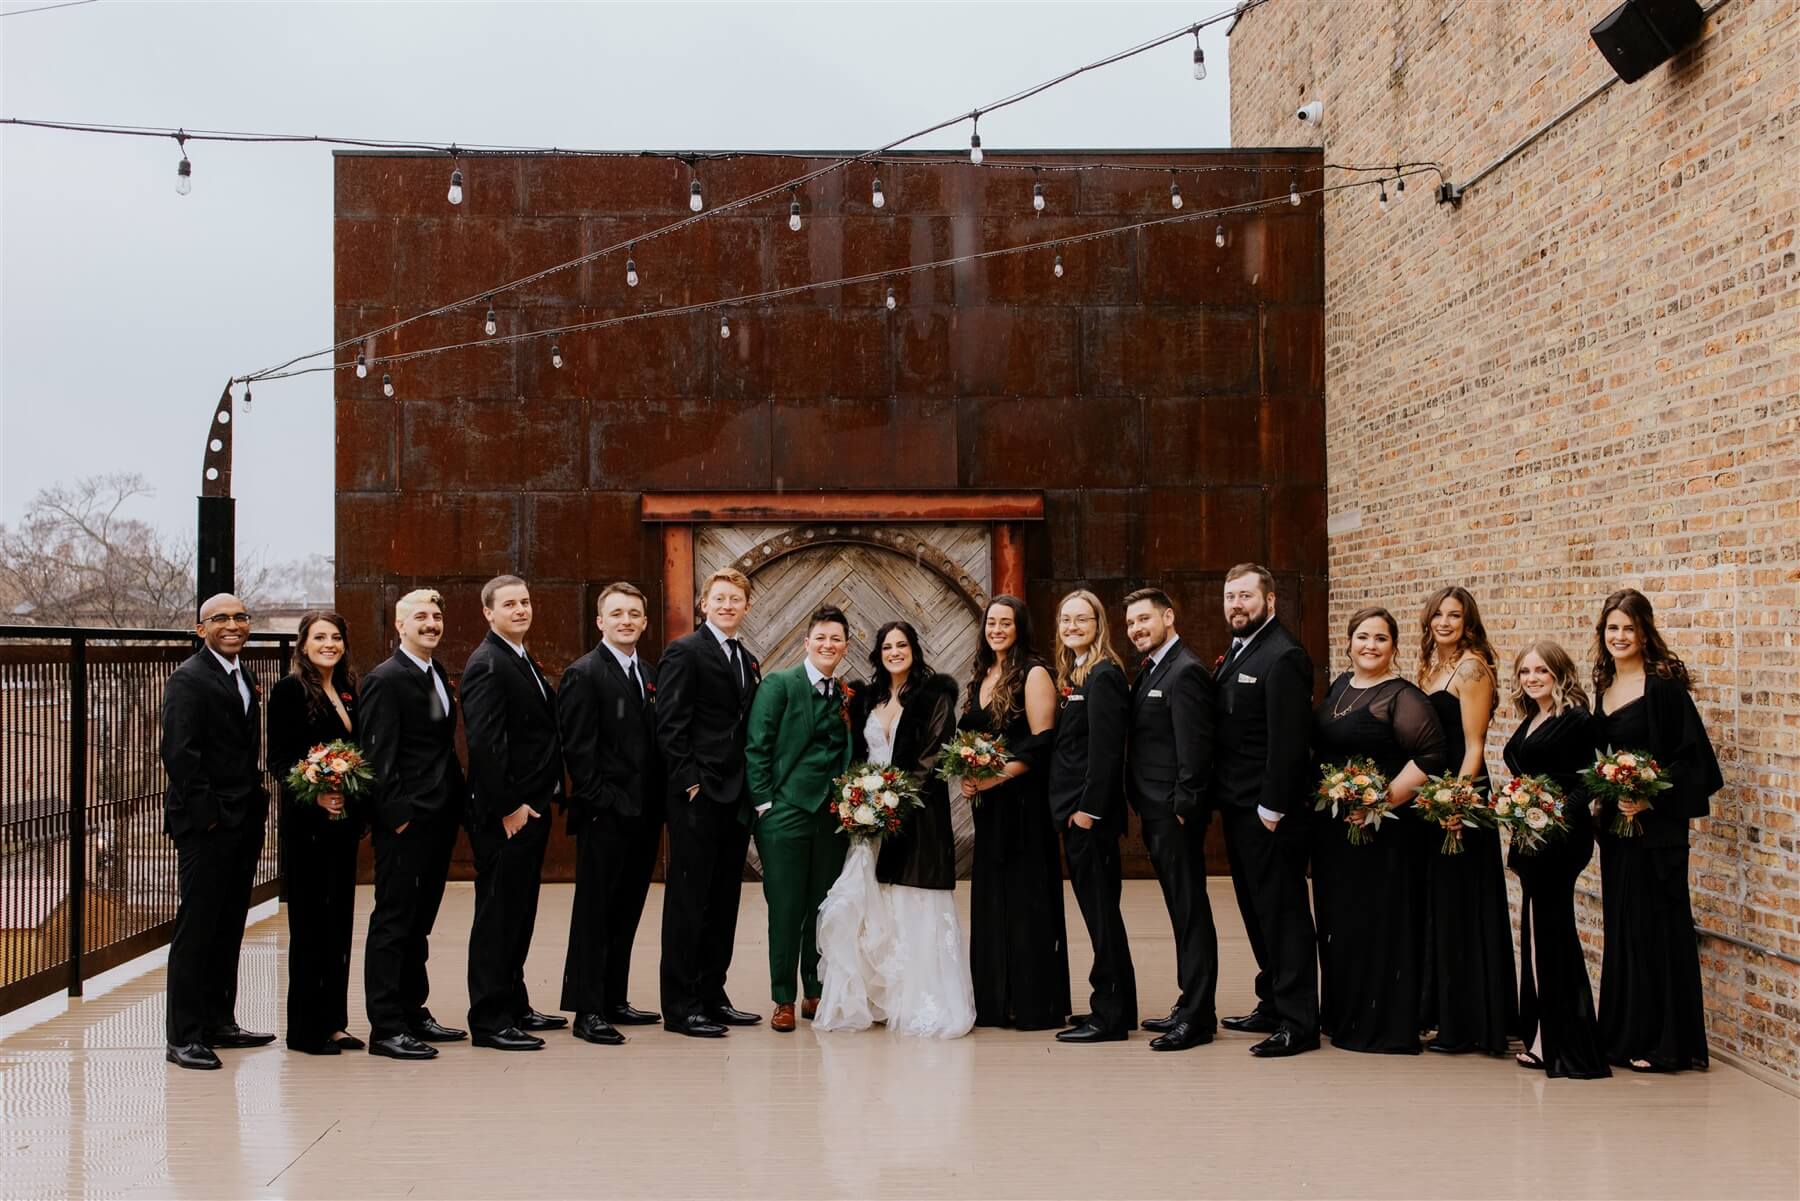 Couple with wedding party who is all wearing black